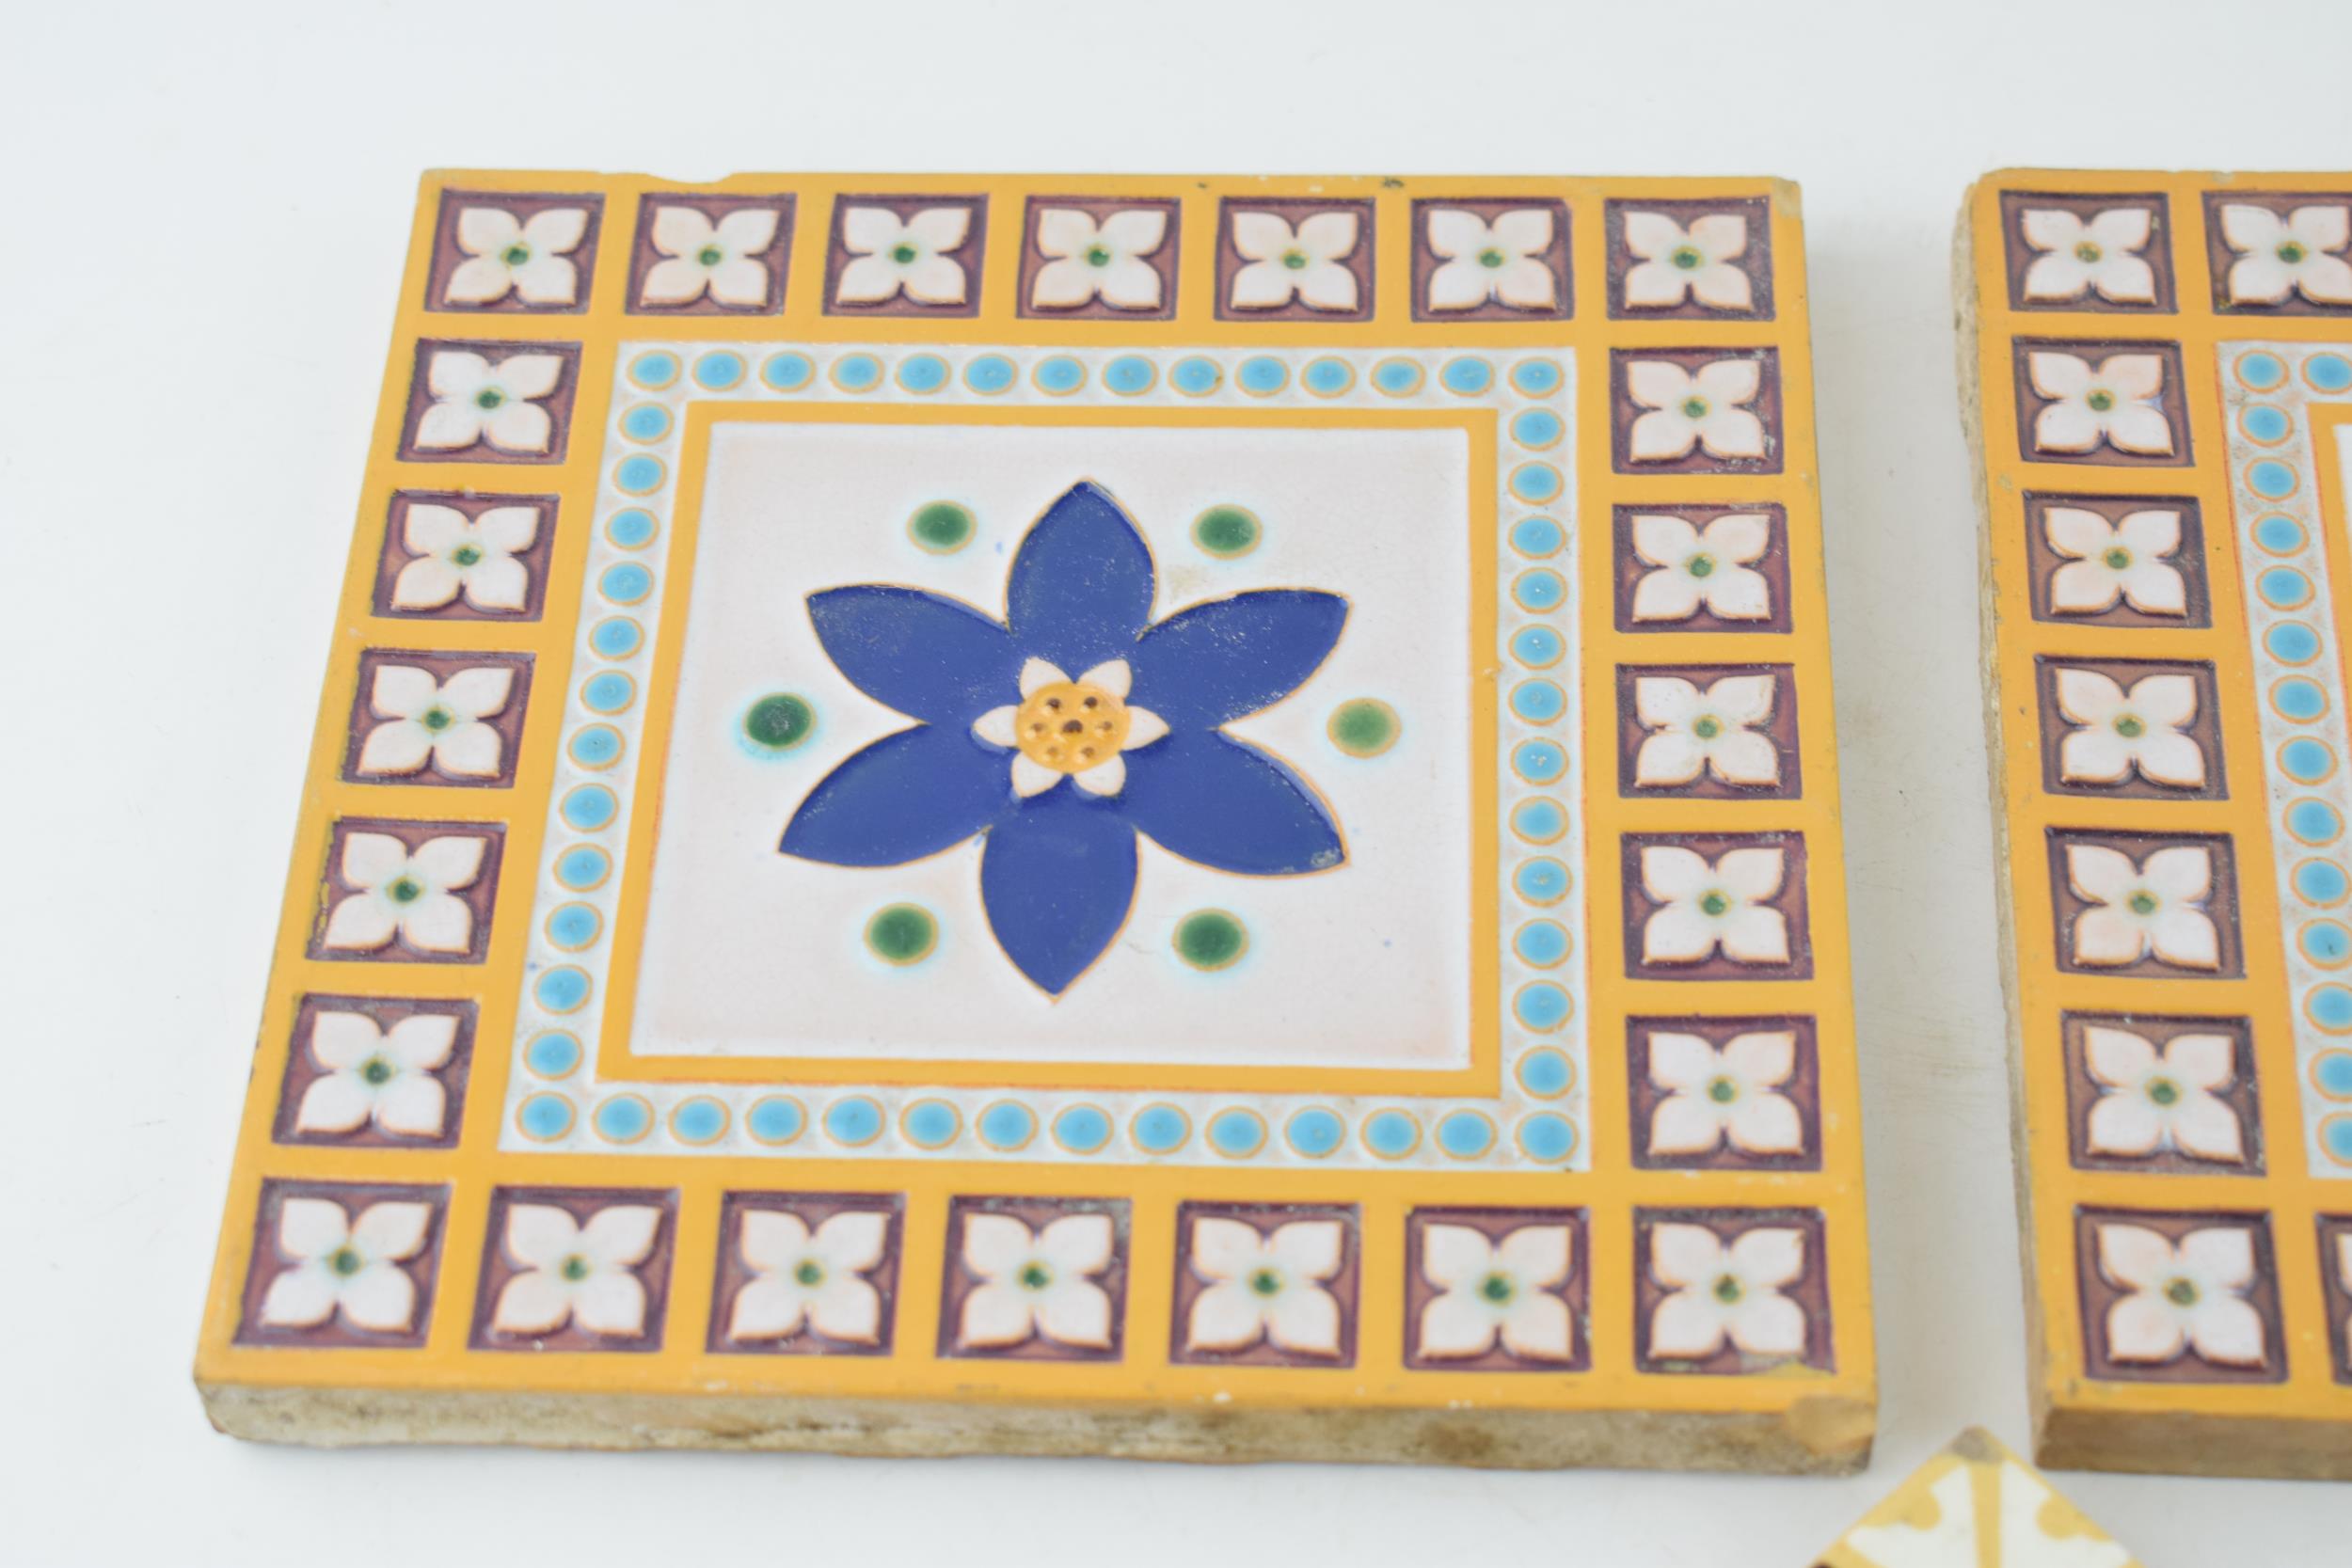 Two 6" Minton & Co, Stoke on Trent glazed tiles with central blue floral design and repeated boarder - Image 4 of 6